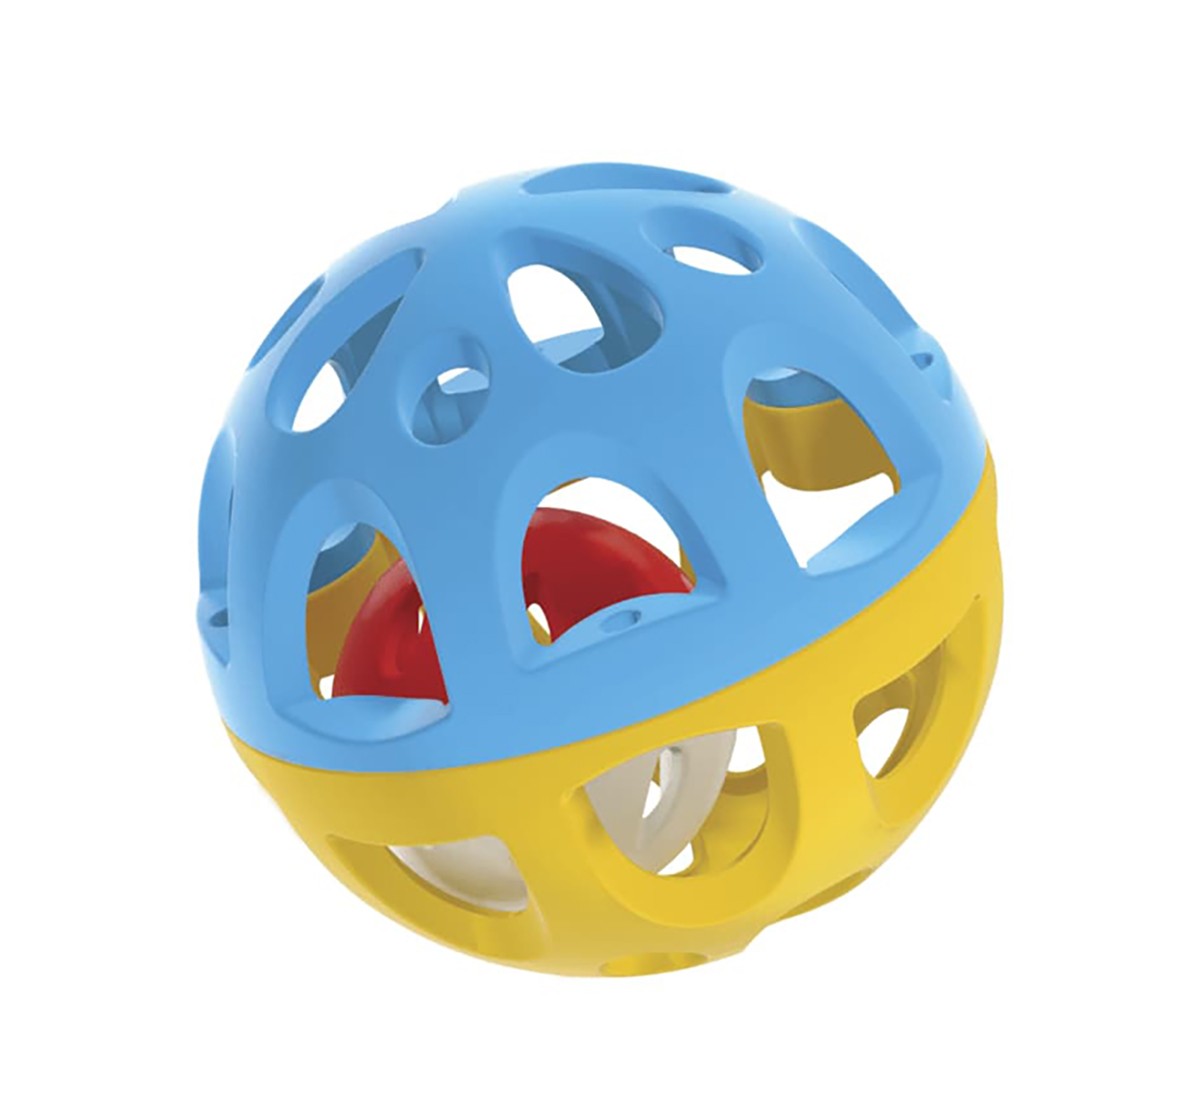 Winfun easy grasp rattle ball New Born for Kids age 3M+ 